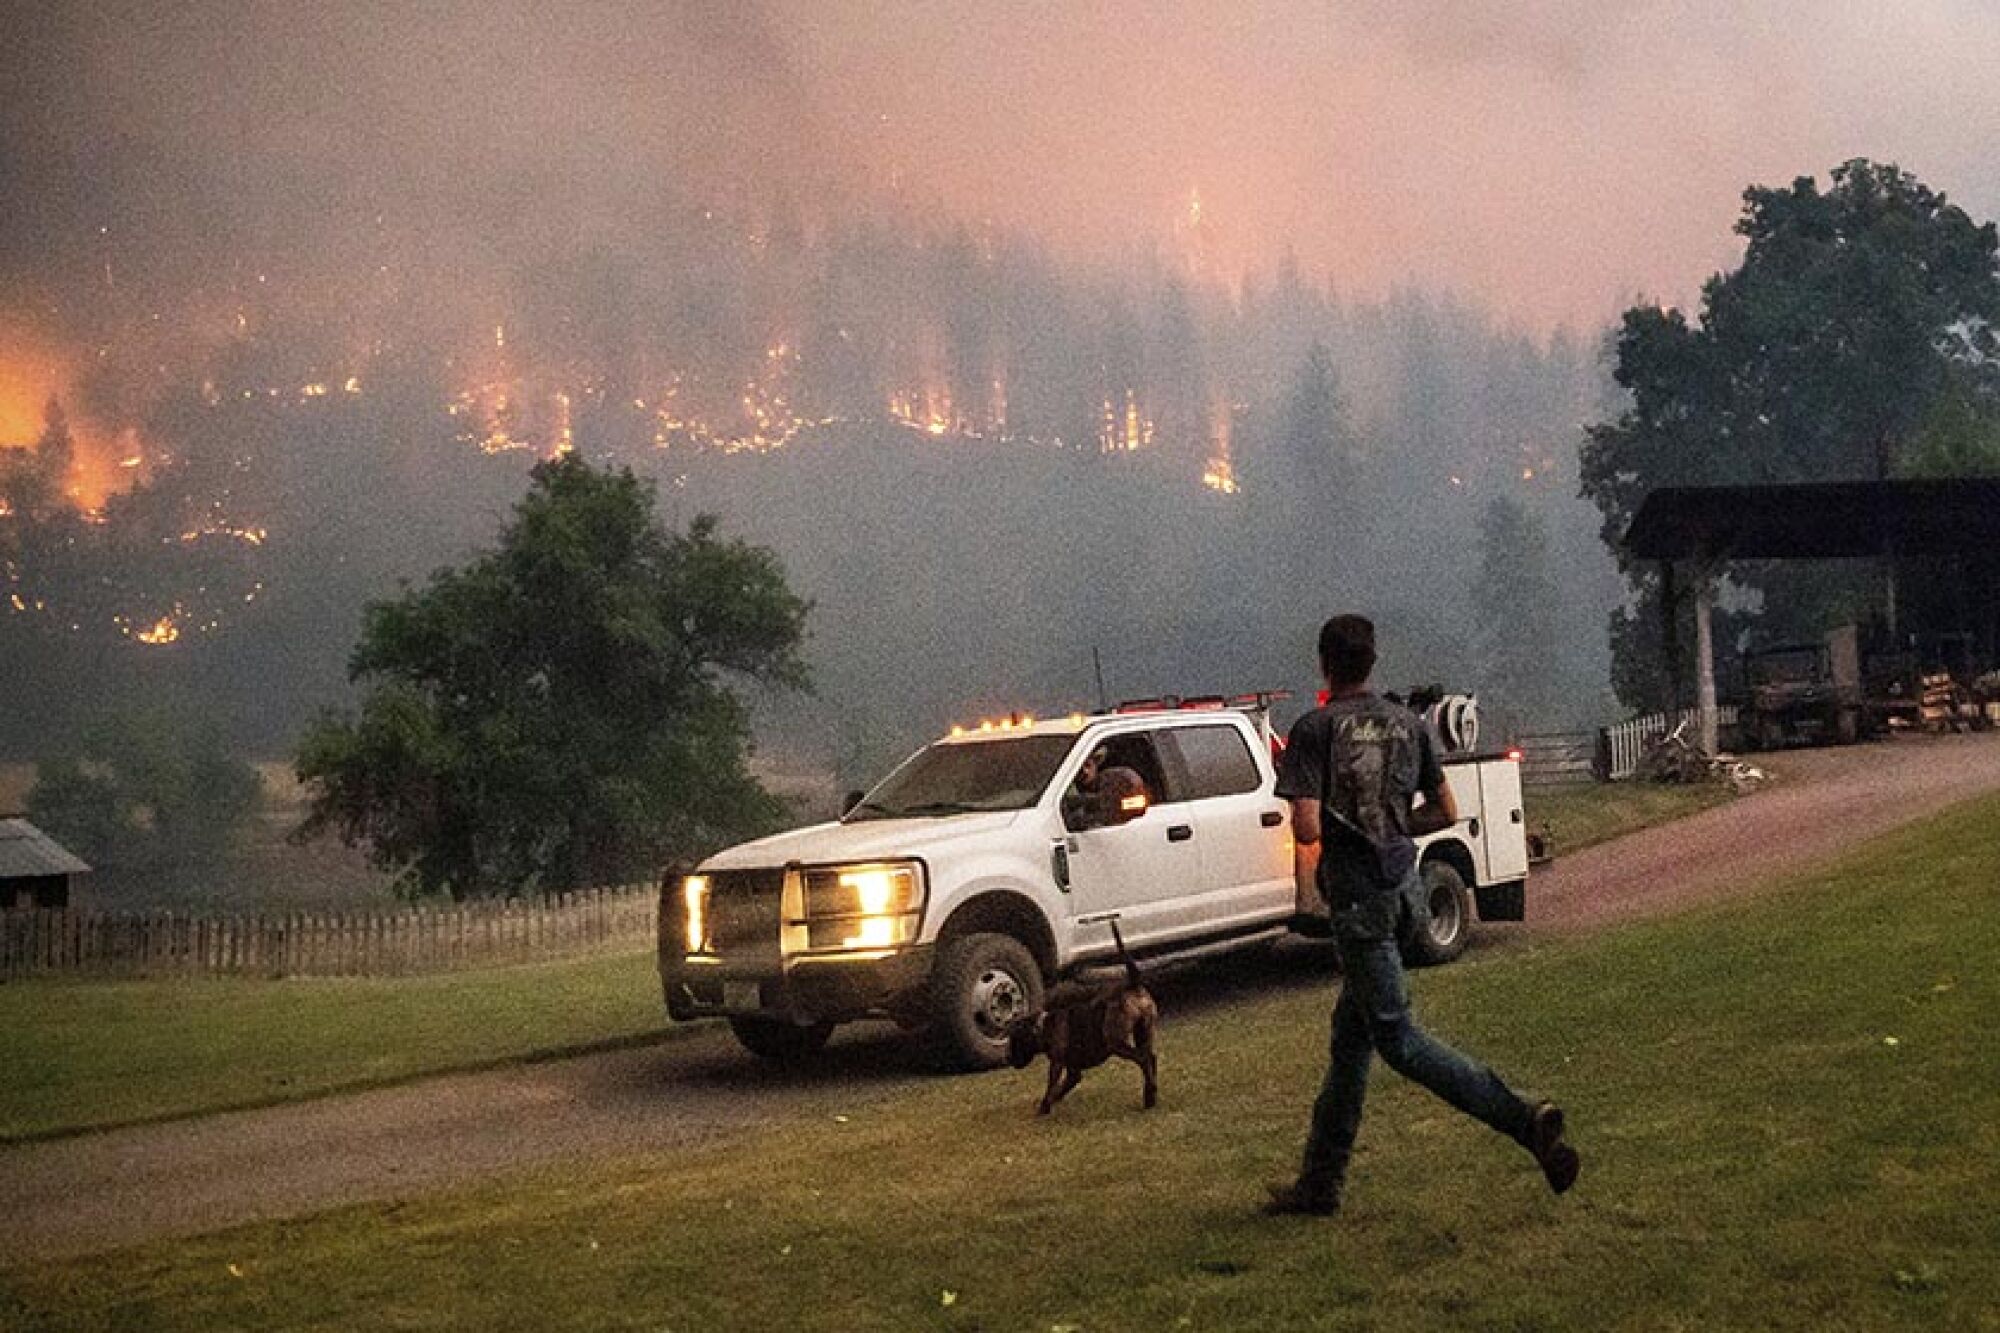 A man and his dog run to a truck near a wildfire.